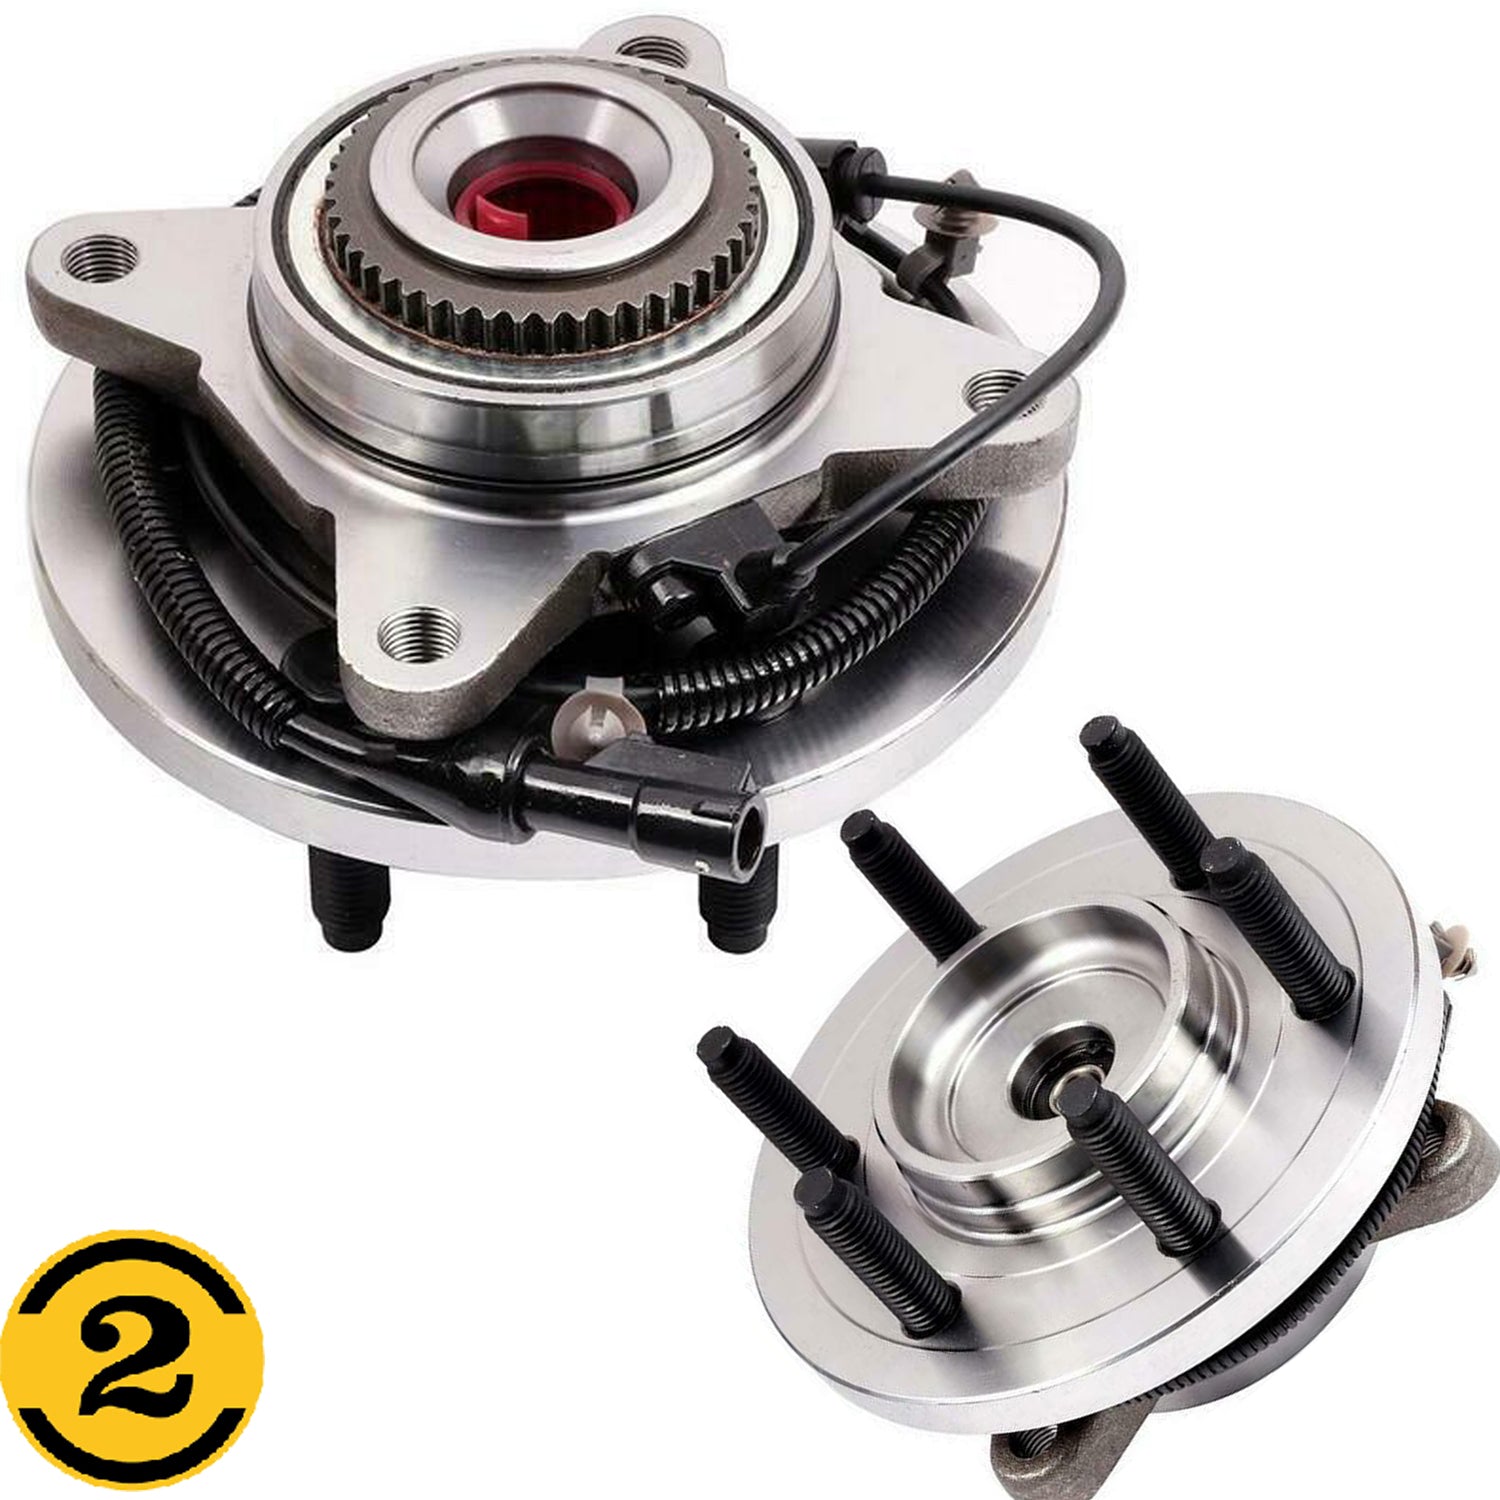 MotorbyMotor 515119 (4WD) Front Wheel Bearing and Hub Assembly 4WD with 6 Lugs Fits for 2009 2010 Ford F-150 (Not for Heavy Duty Payload Models), Lincoln Navigator Hub Bearing (4WD 4x4, w/ABS)-2PK